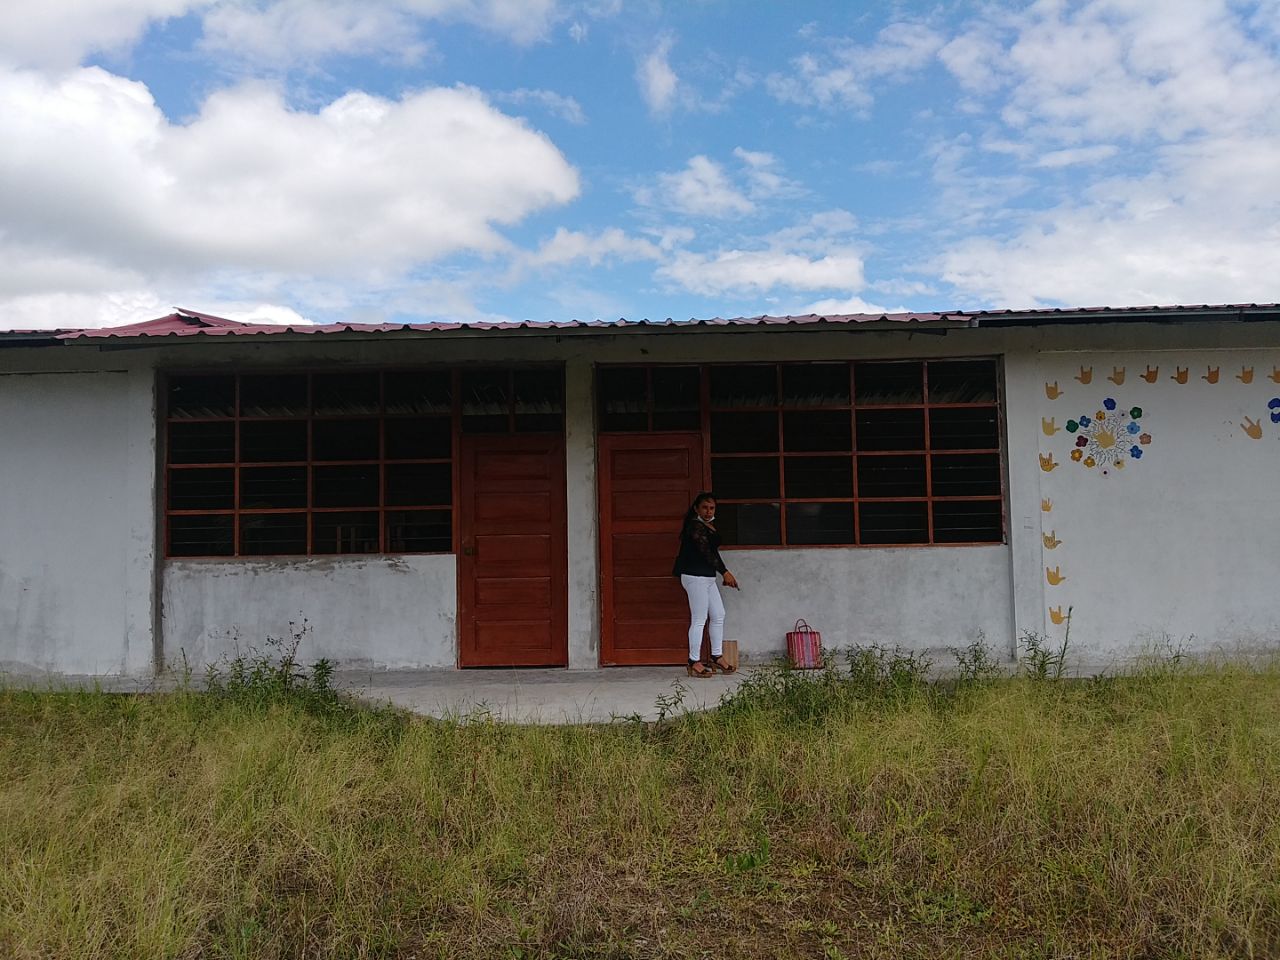 The two-room schoolhouse for the hearing impaired in San Martin, Peru has sat idle for nearly two years as students eagerly await being able to return to in-person classes in 2022.